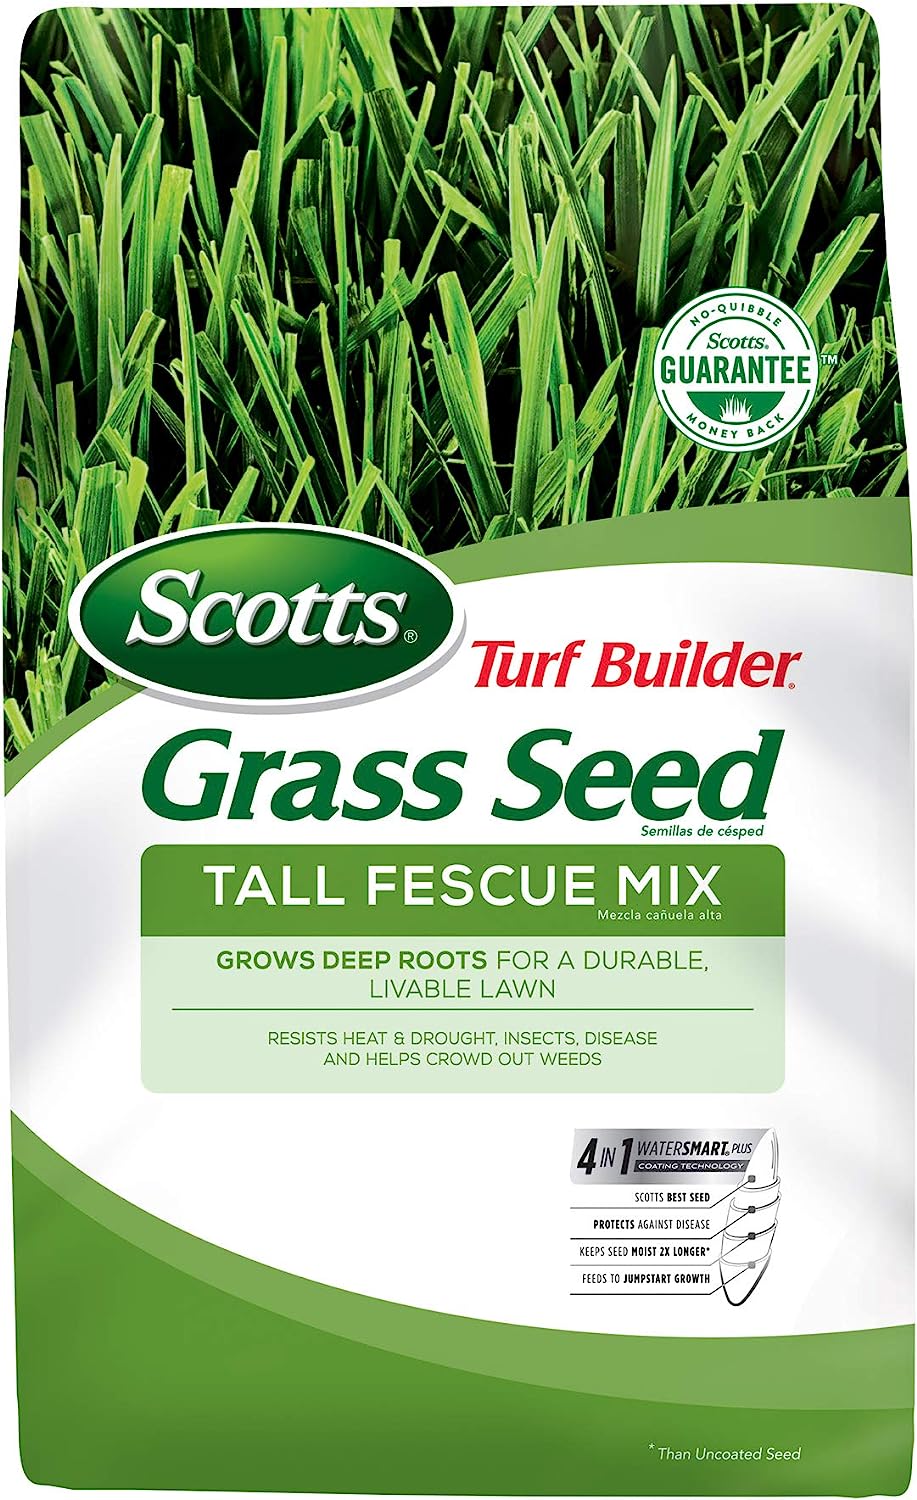 Scotts Turf Builder Grass Seed Tall Fescue Mix, Grows [...]